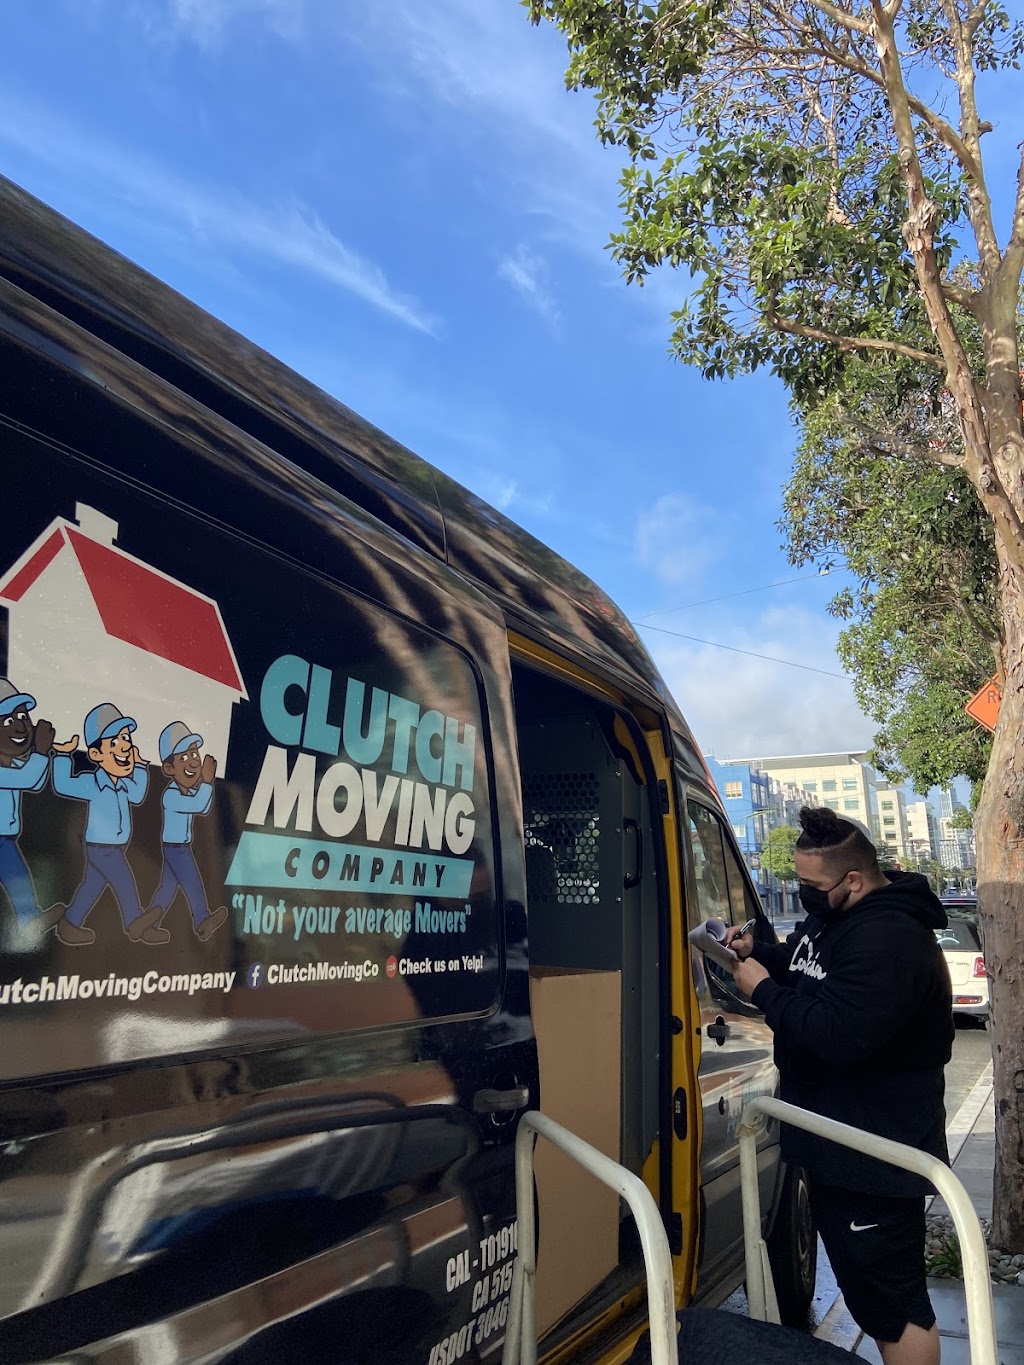 Clutch Moving Company | 975 Linden Ave, South San Francisco, CA 94080 | Phone: (650) 753-8428